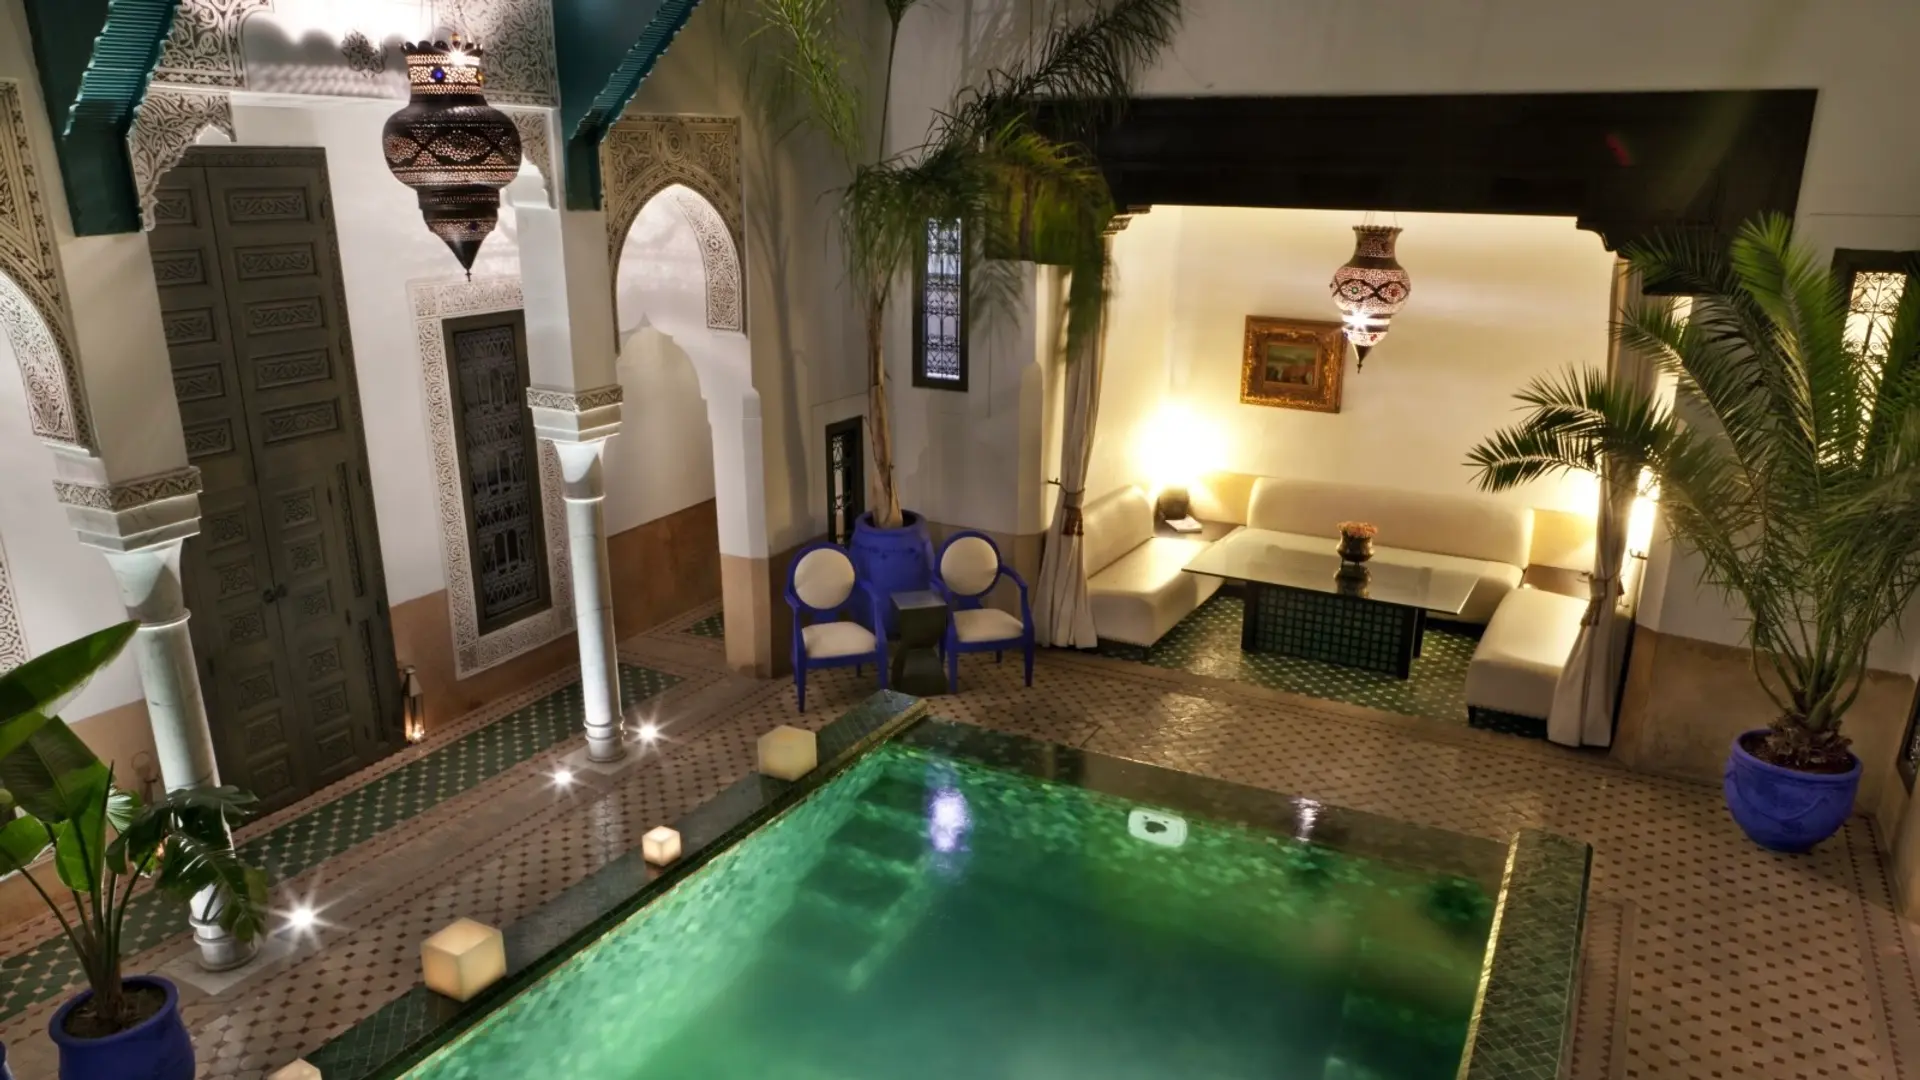 Green coloured pool, sofa under the rood and white design at Riad Farnatchi